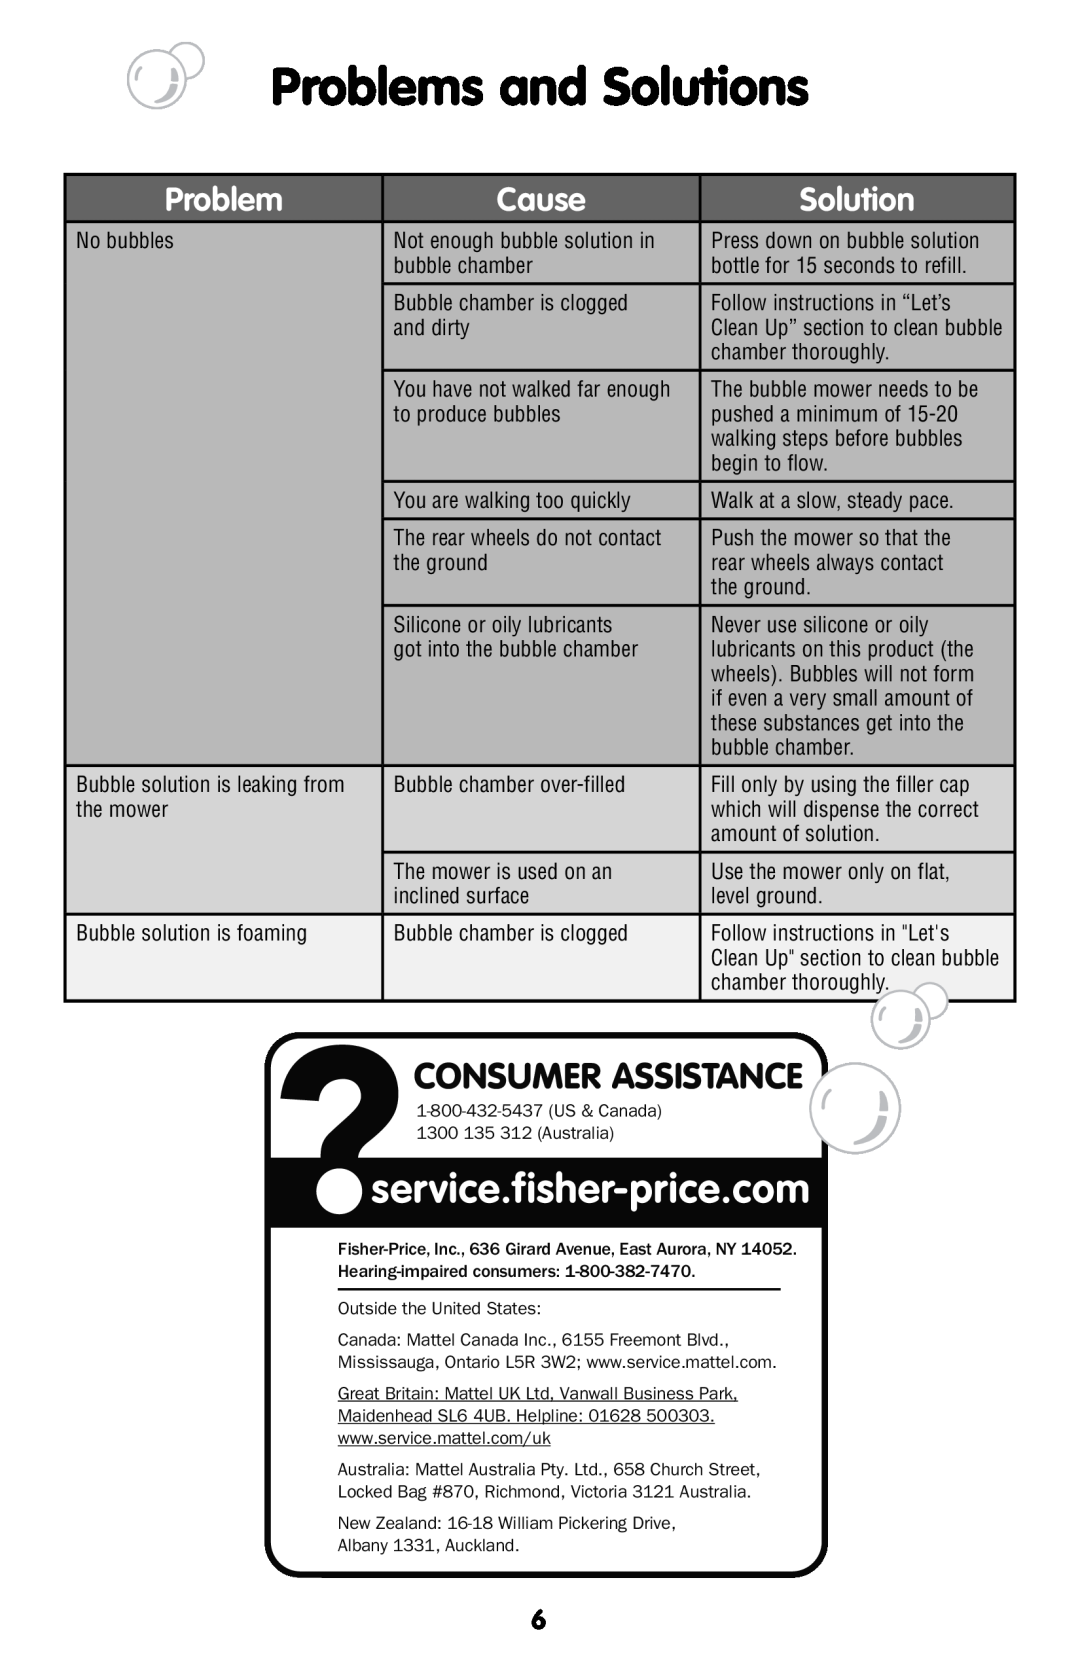 Fisher-Price H8910 instruction sheet Problems and Solutions, Consumer Assistance, Cause 